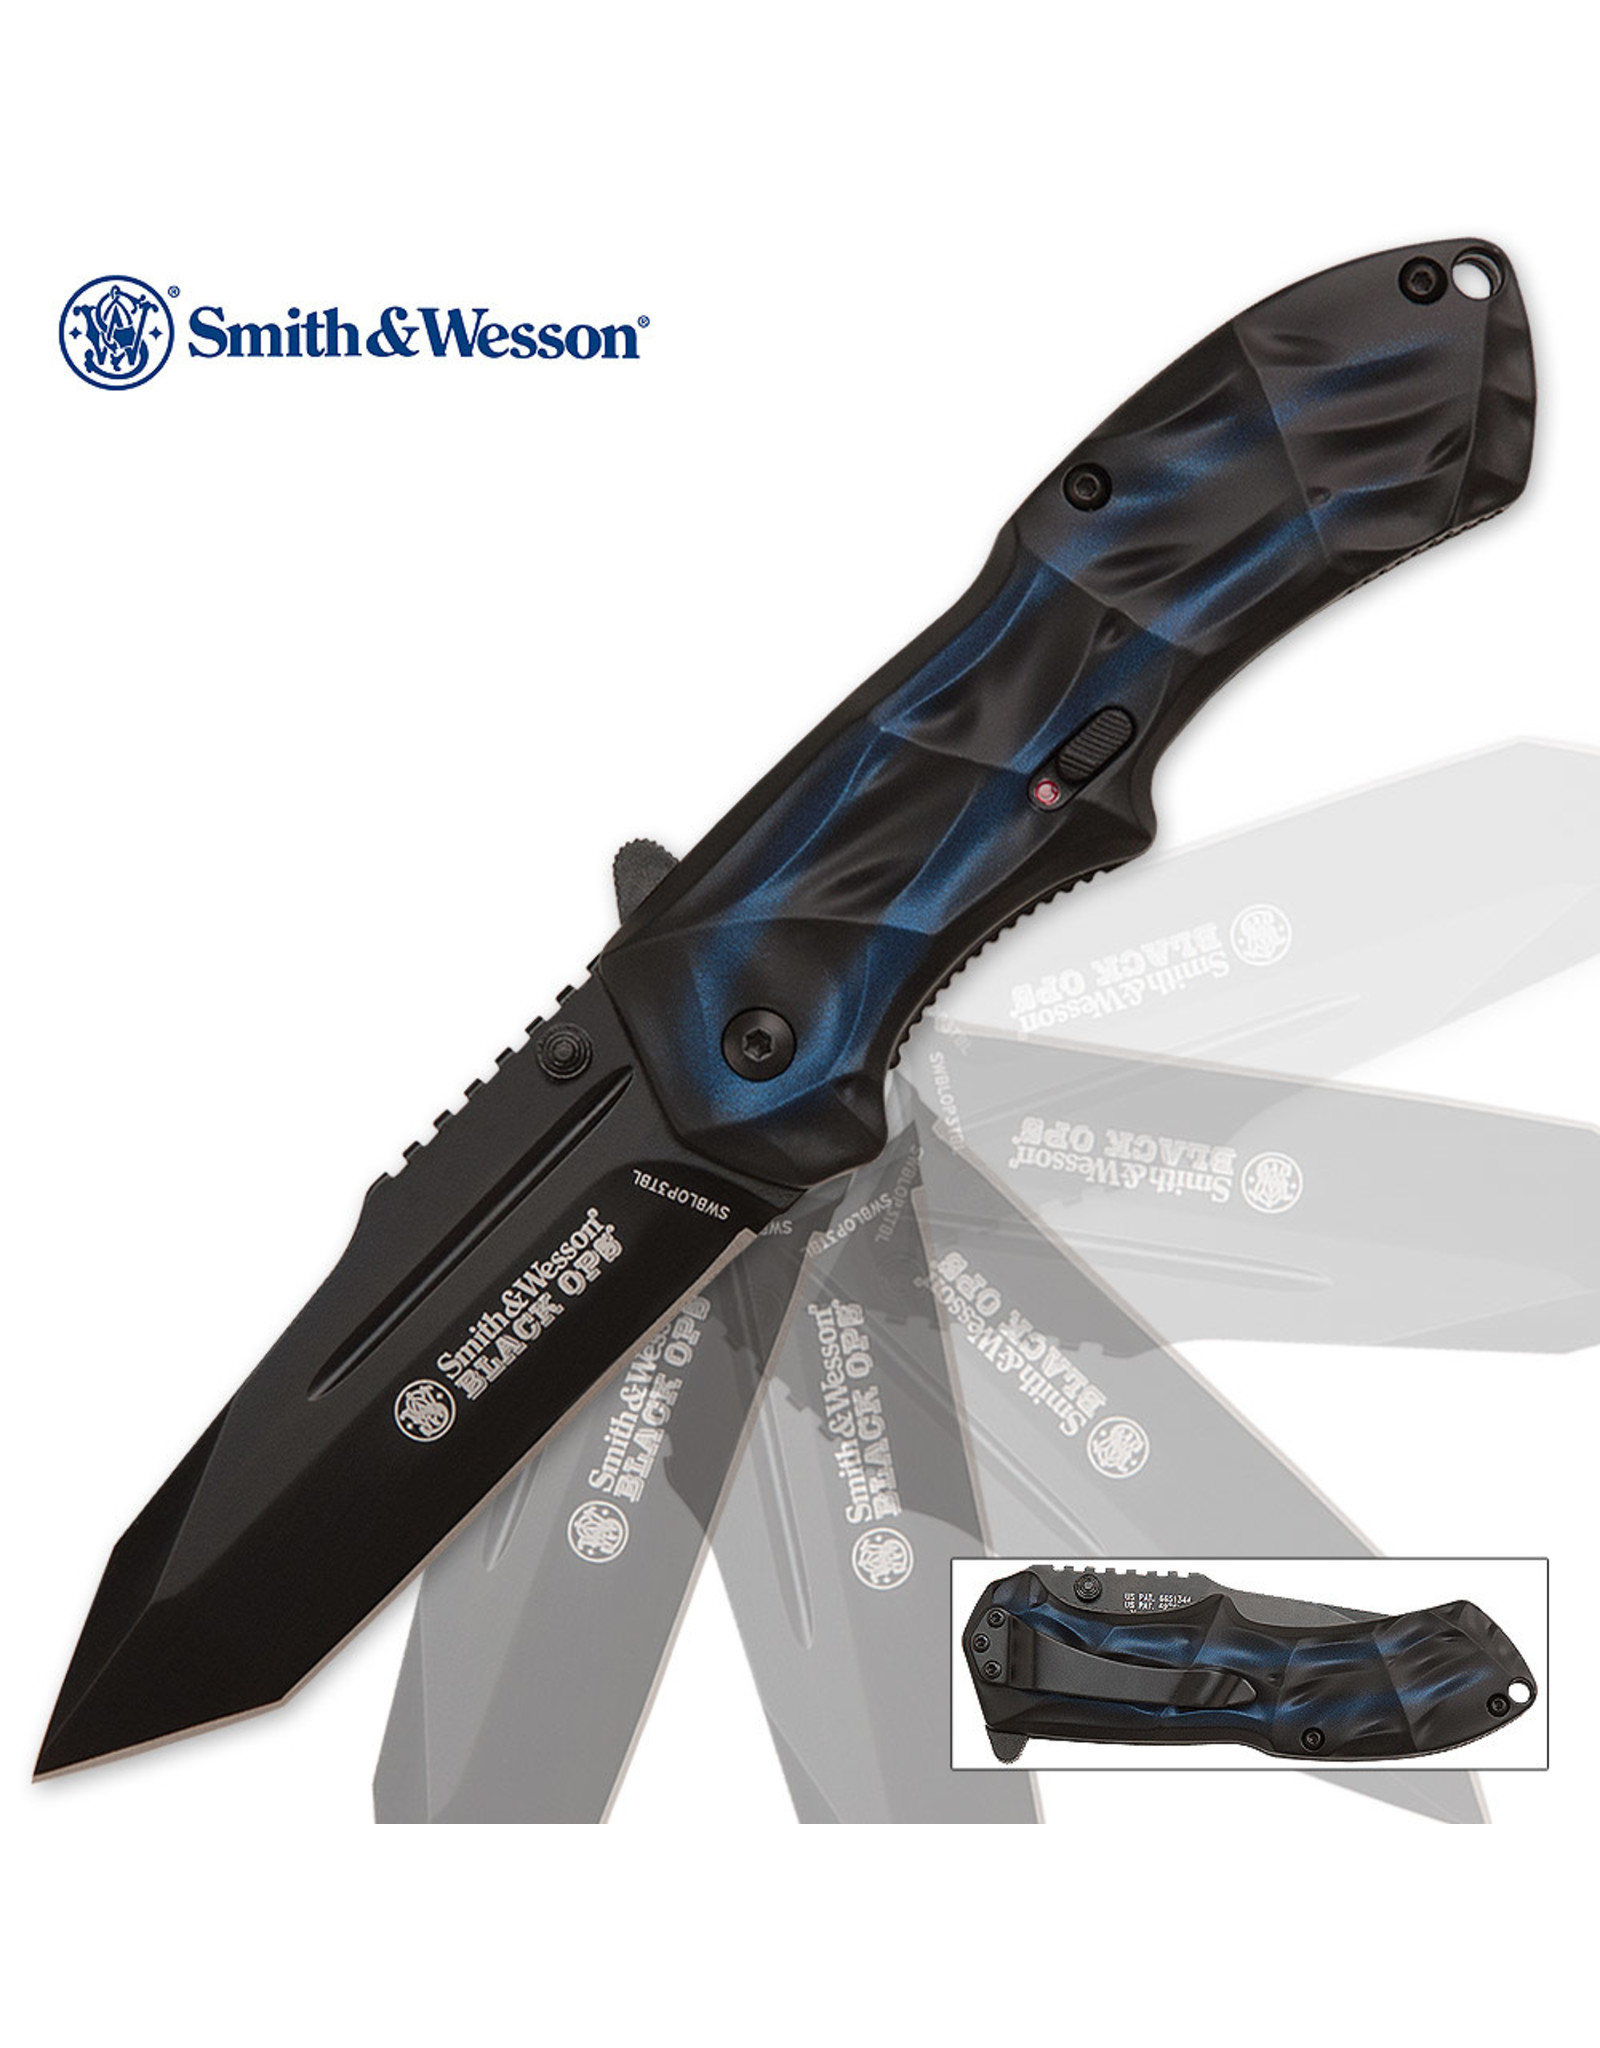 Smith & Wesson Smith & Wesson Black Ops Assisted Opening Pocket Knife